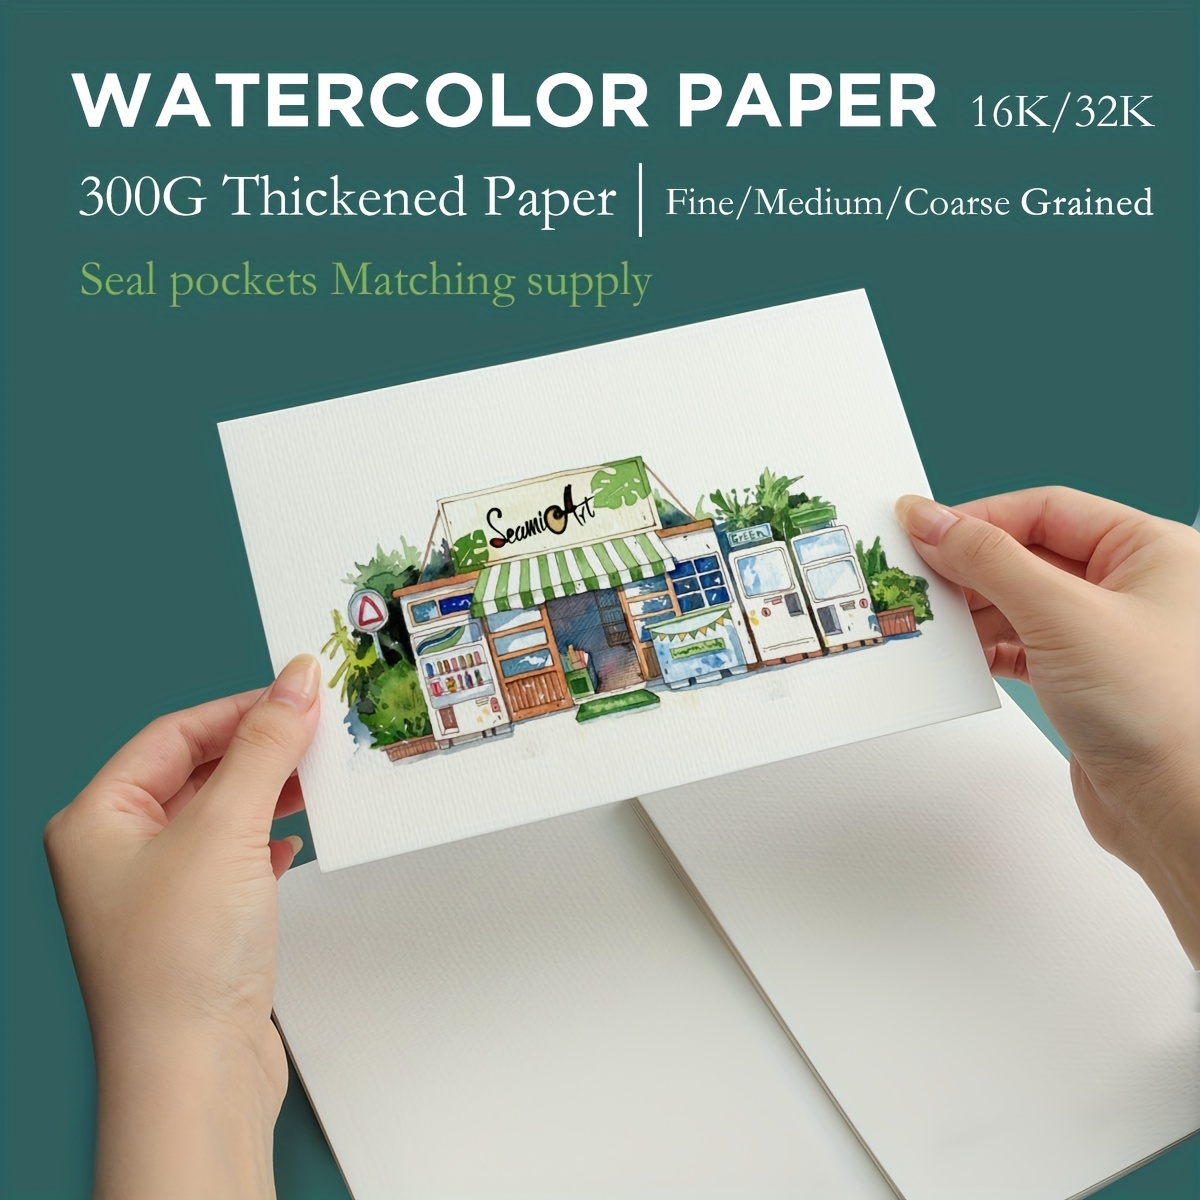 50 Sheets of Watercolor Paper Cards 300g Square Round Cardstock Calligraphy  Medium Thick Grain Art Painting Blank Paper - AliExpress